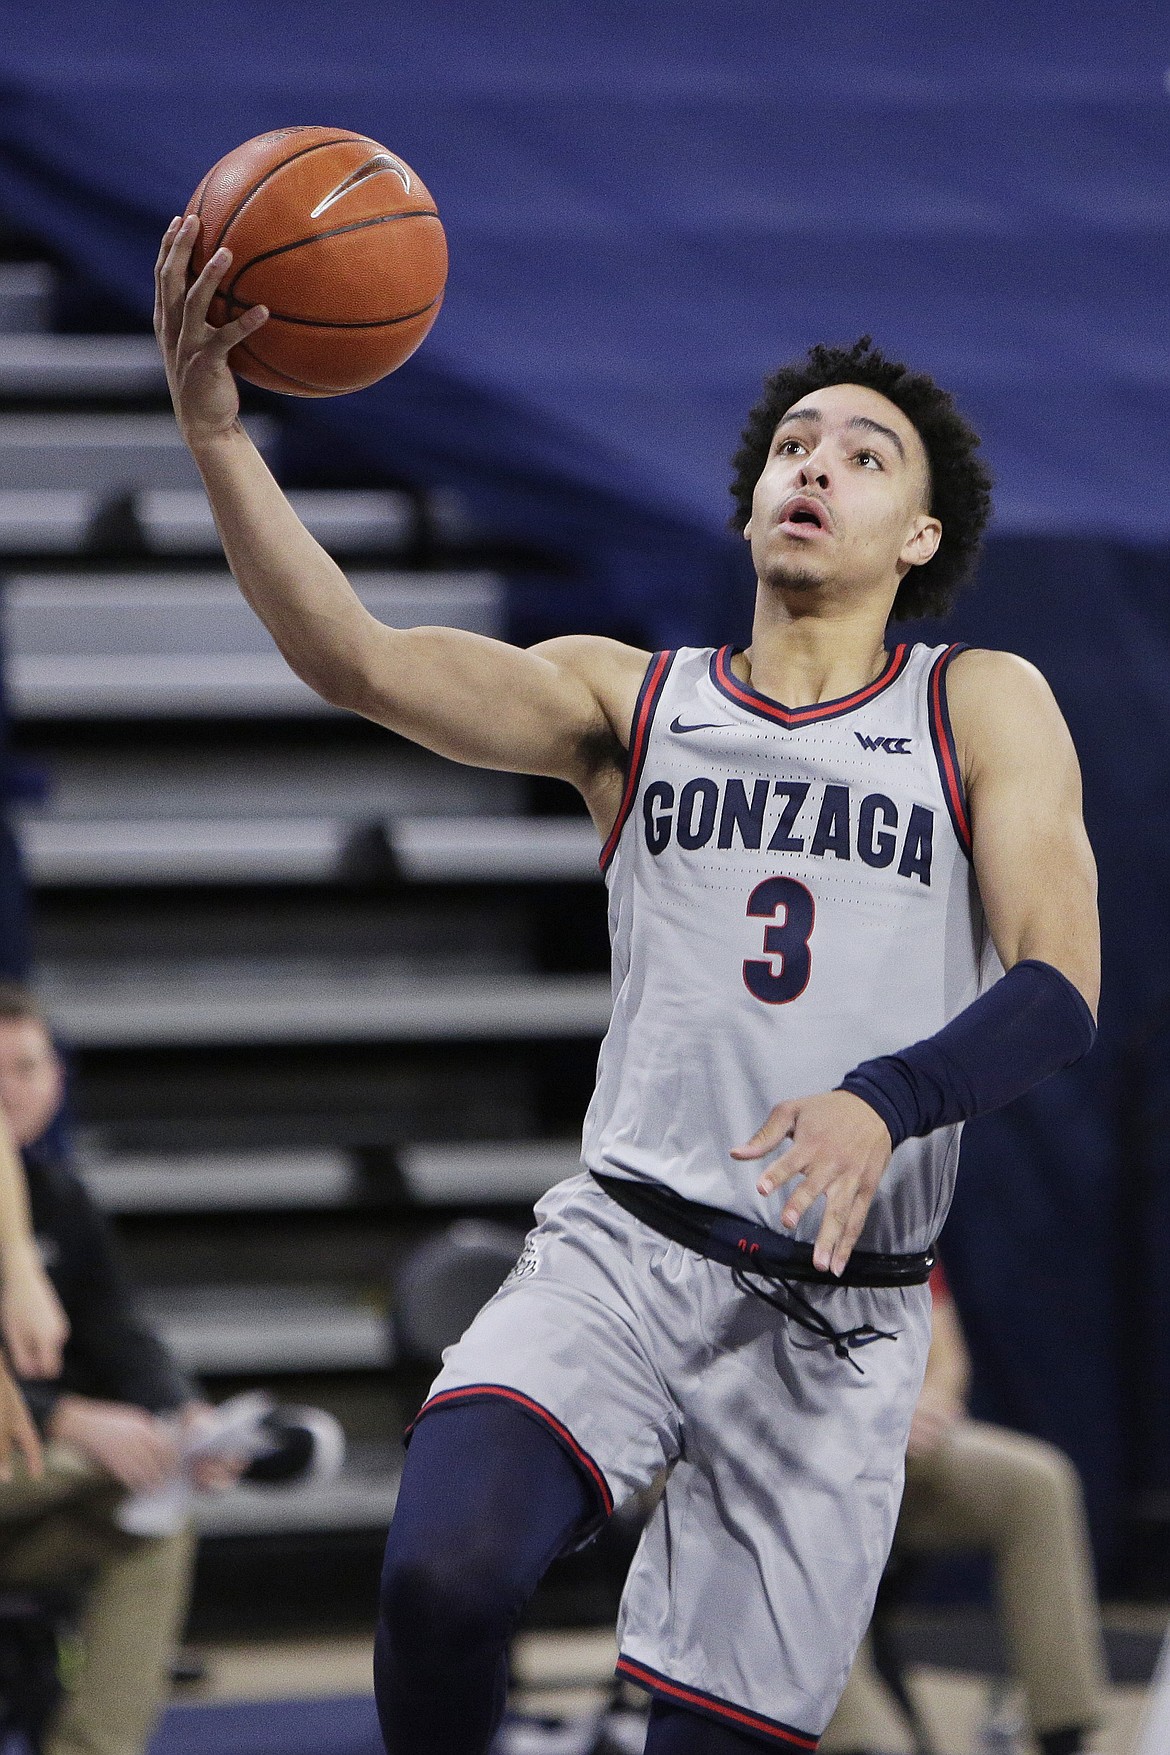 YOUNG KWAK/Associated Press
Gonzaga guard Andrew Nembhard goes for a layup during the second half of Tuesday's game against Northwestern State in Spokane.